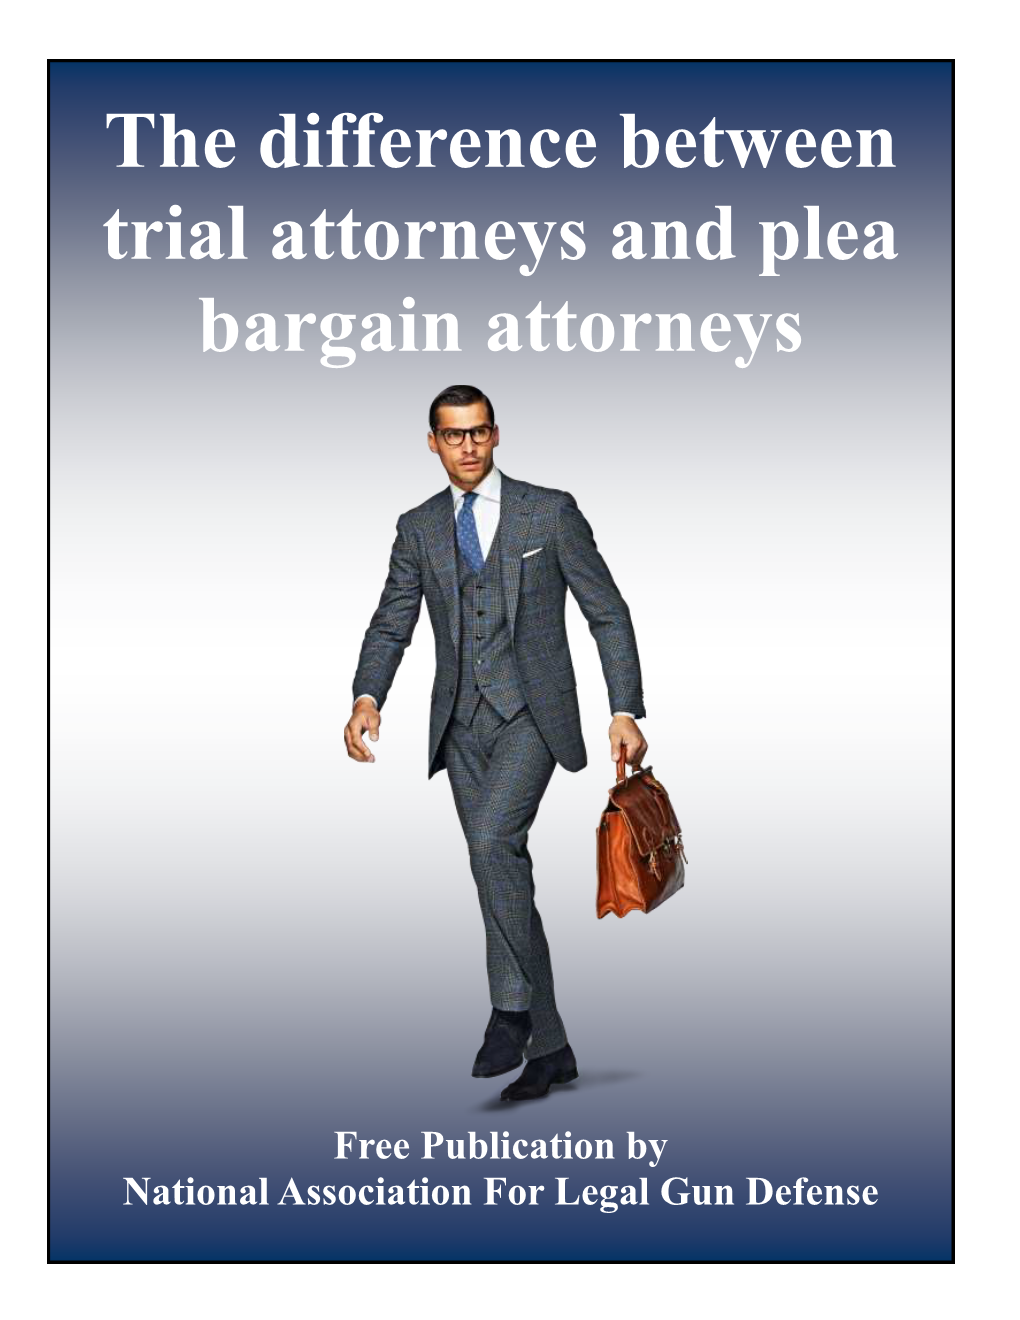 The Difference Between Trial Attorneys and Plea Bargain Attorneys